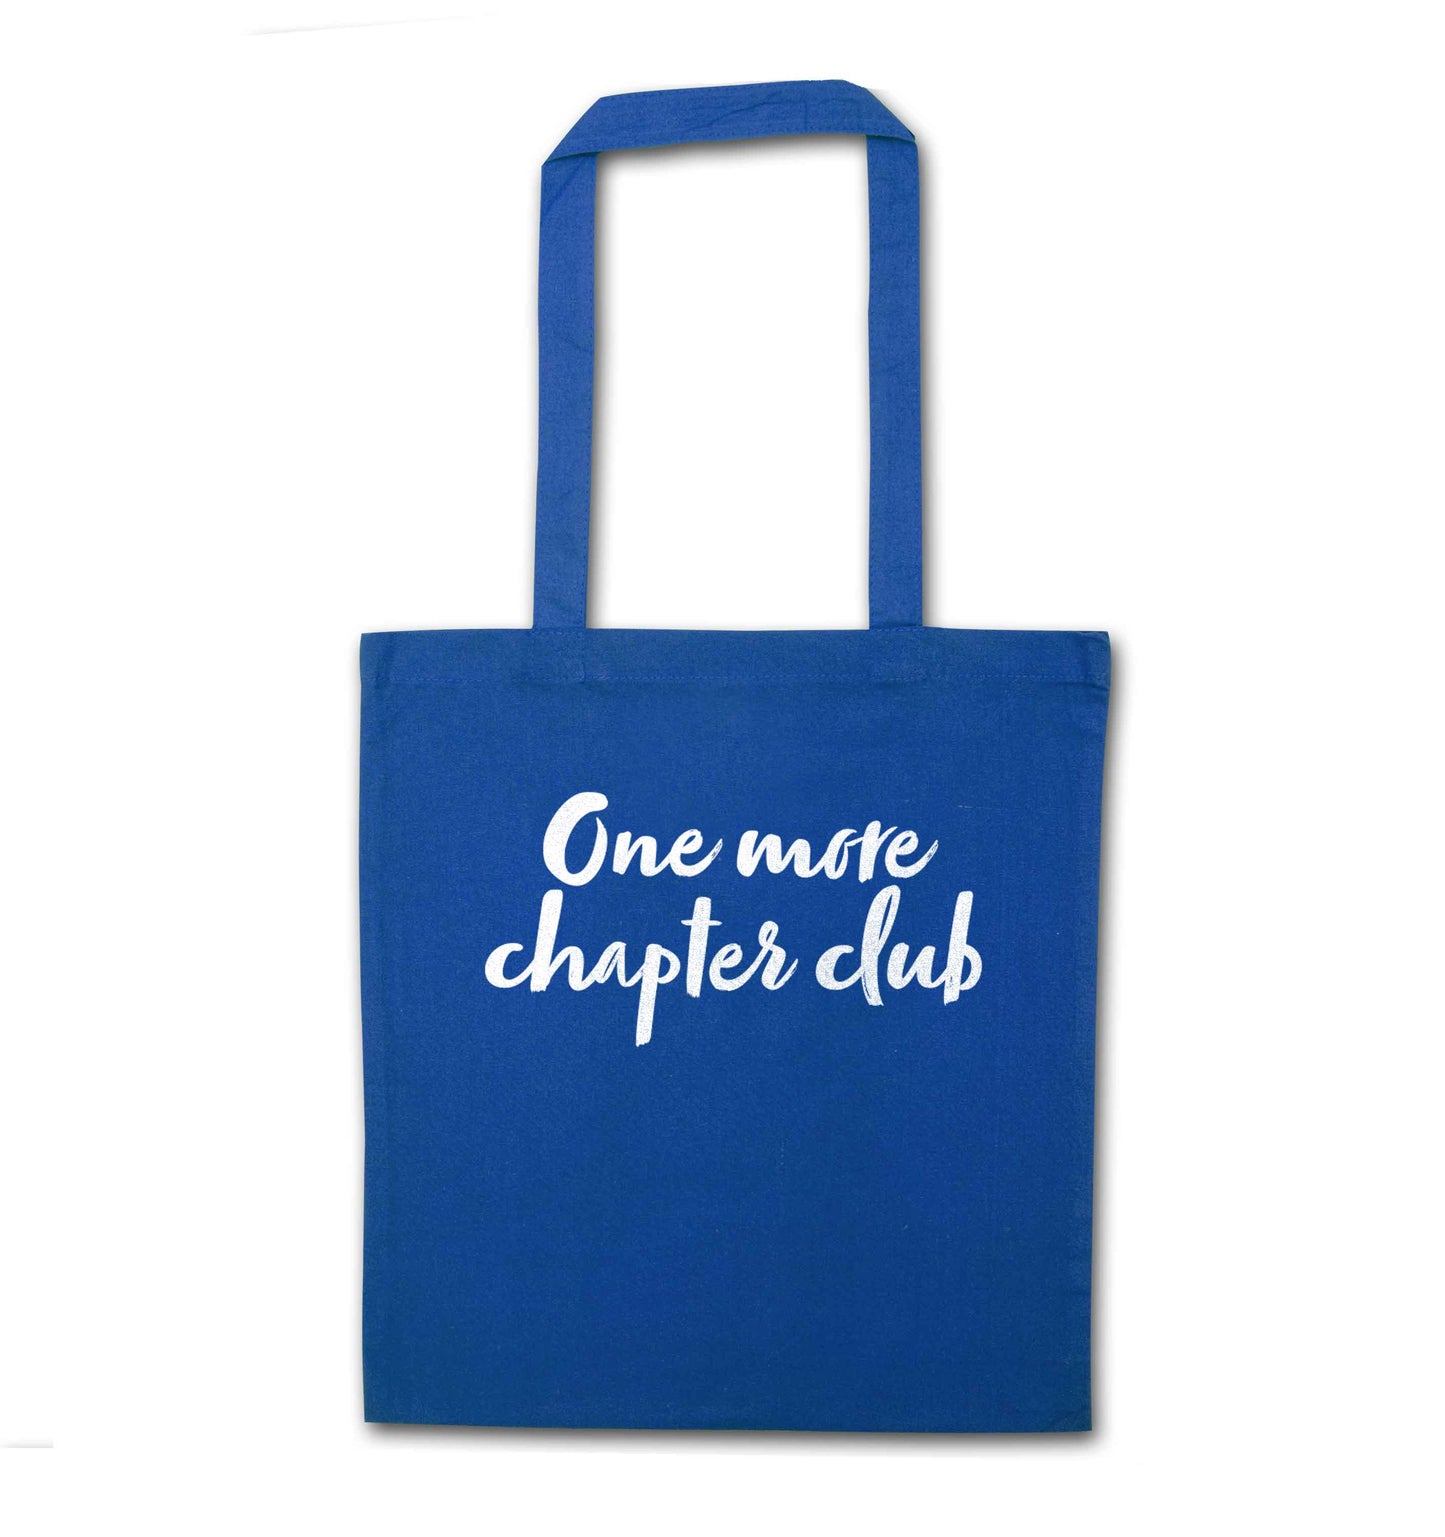 One more chapter club Kit blue tote bag